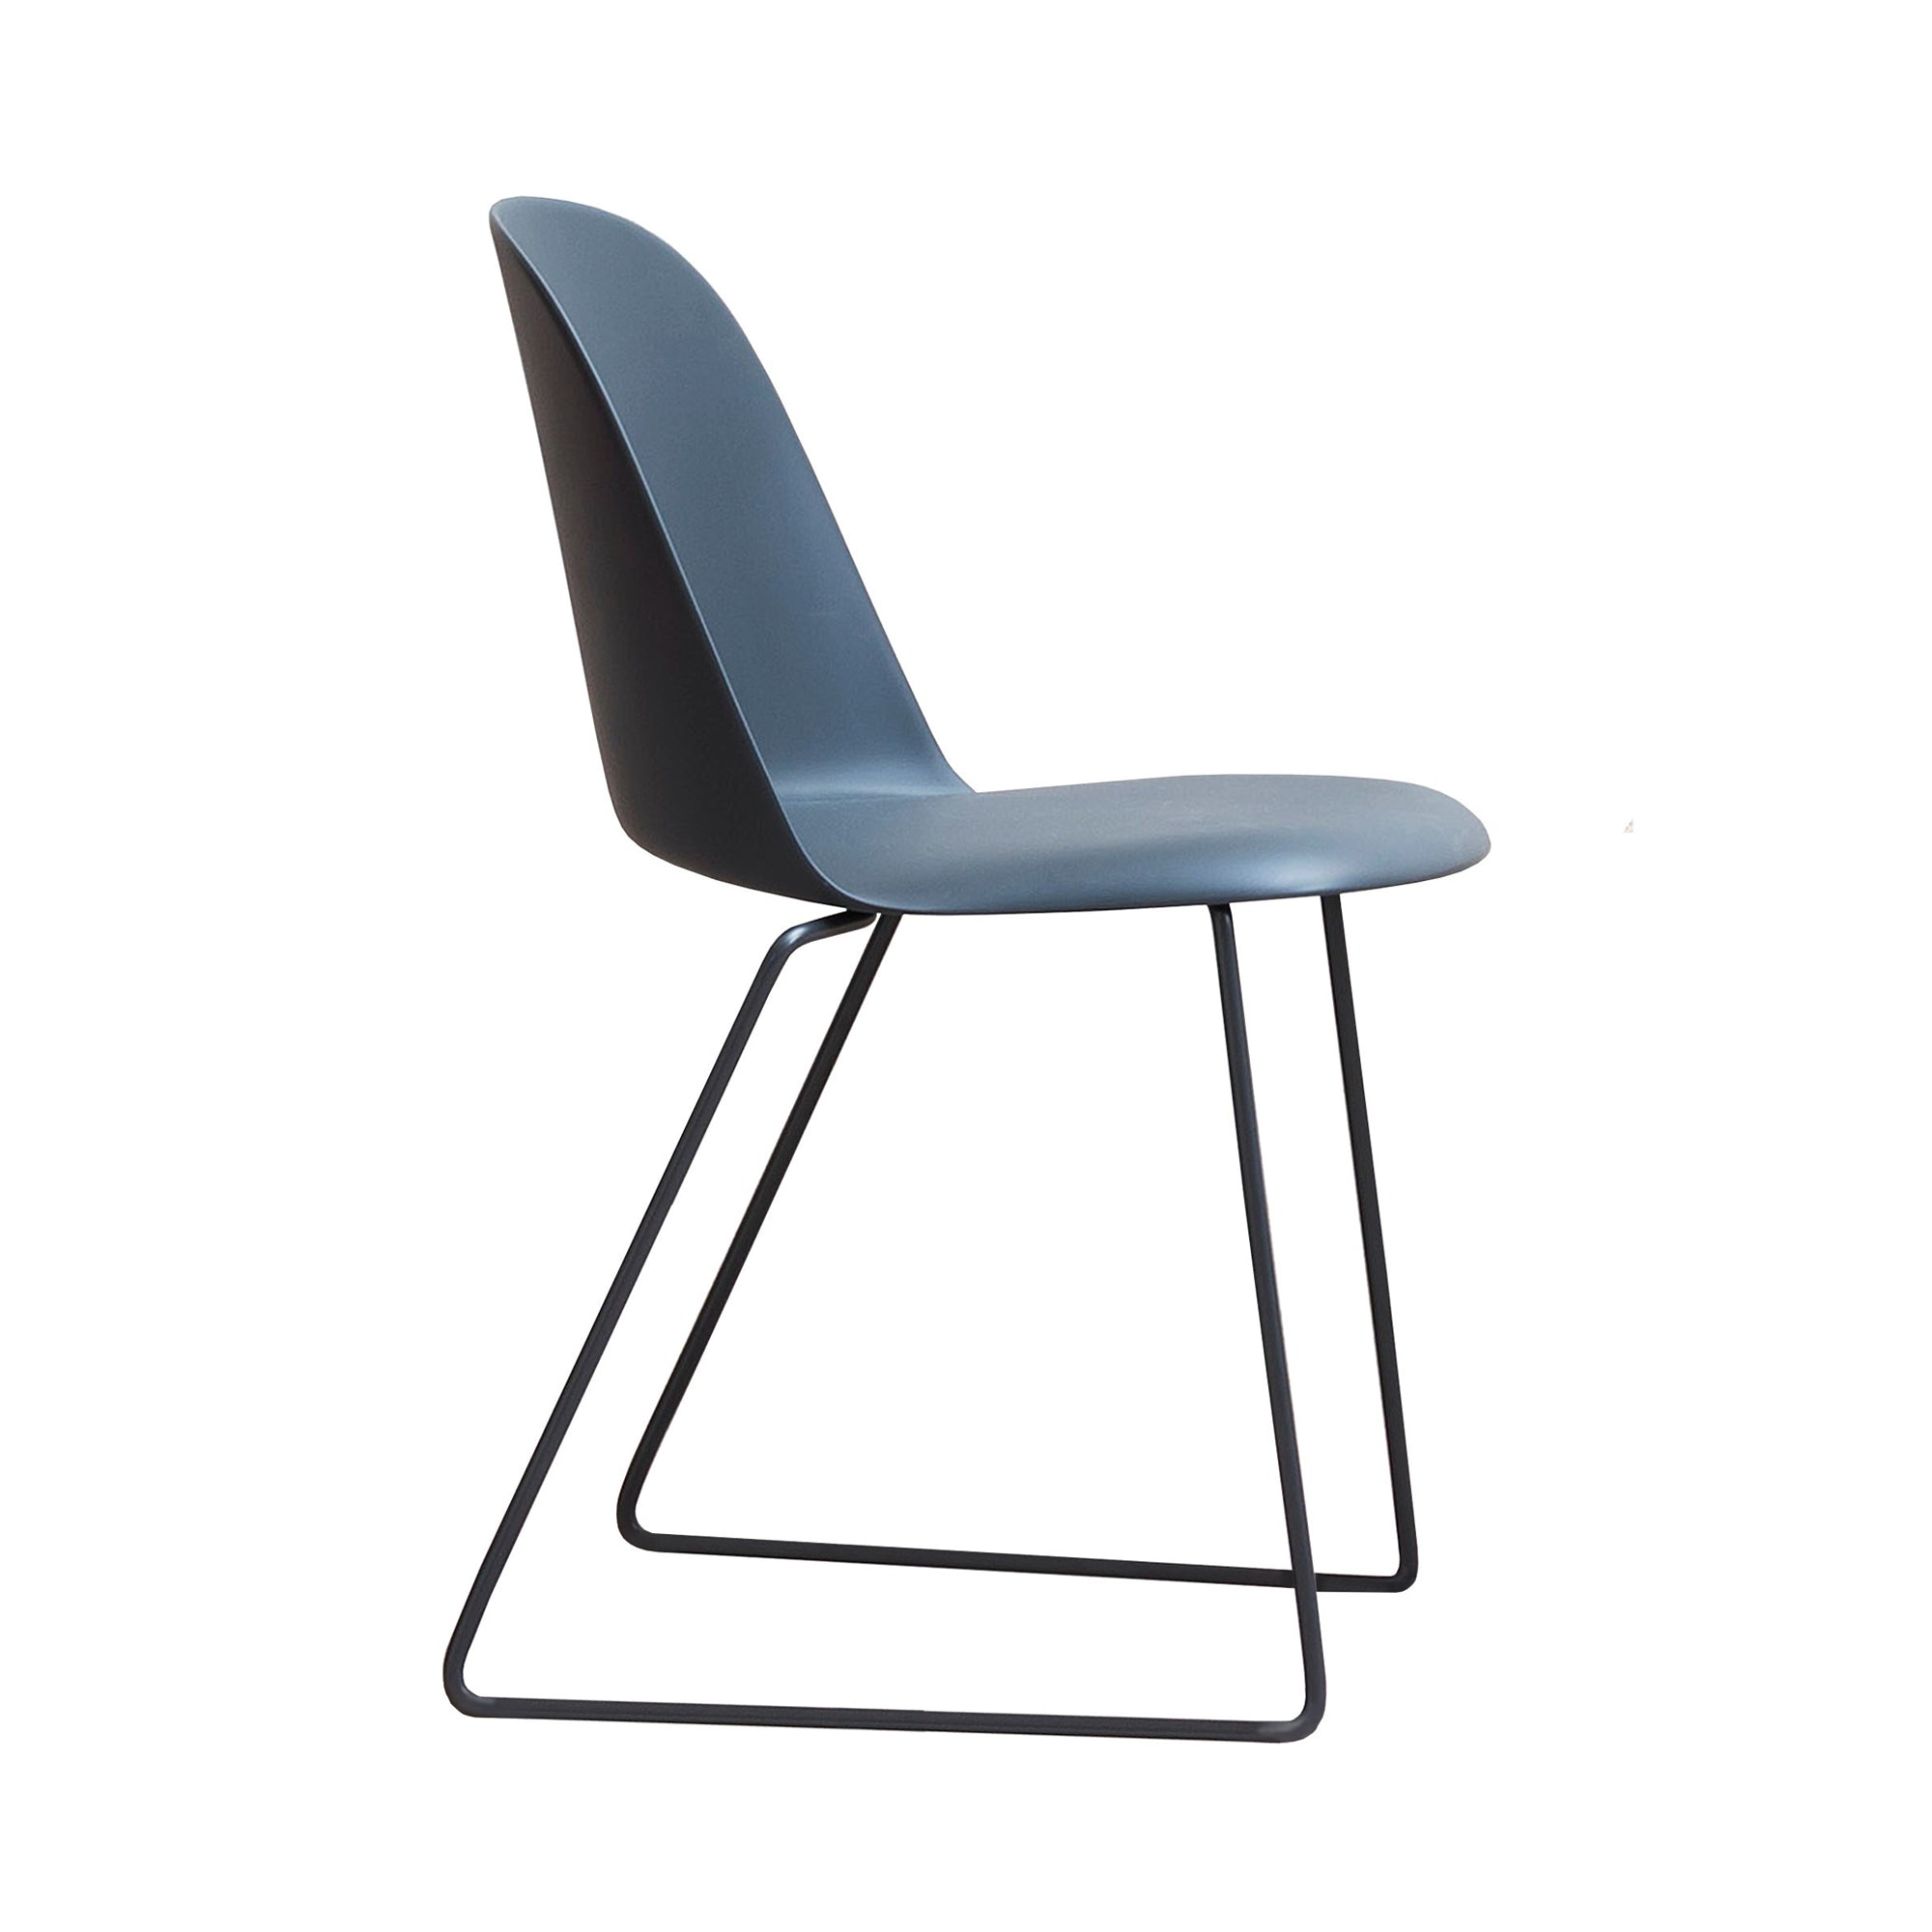 Mariolina Side Chair: Sledge Base + Lacquered Anthracite + Intense Blue